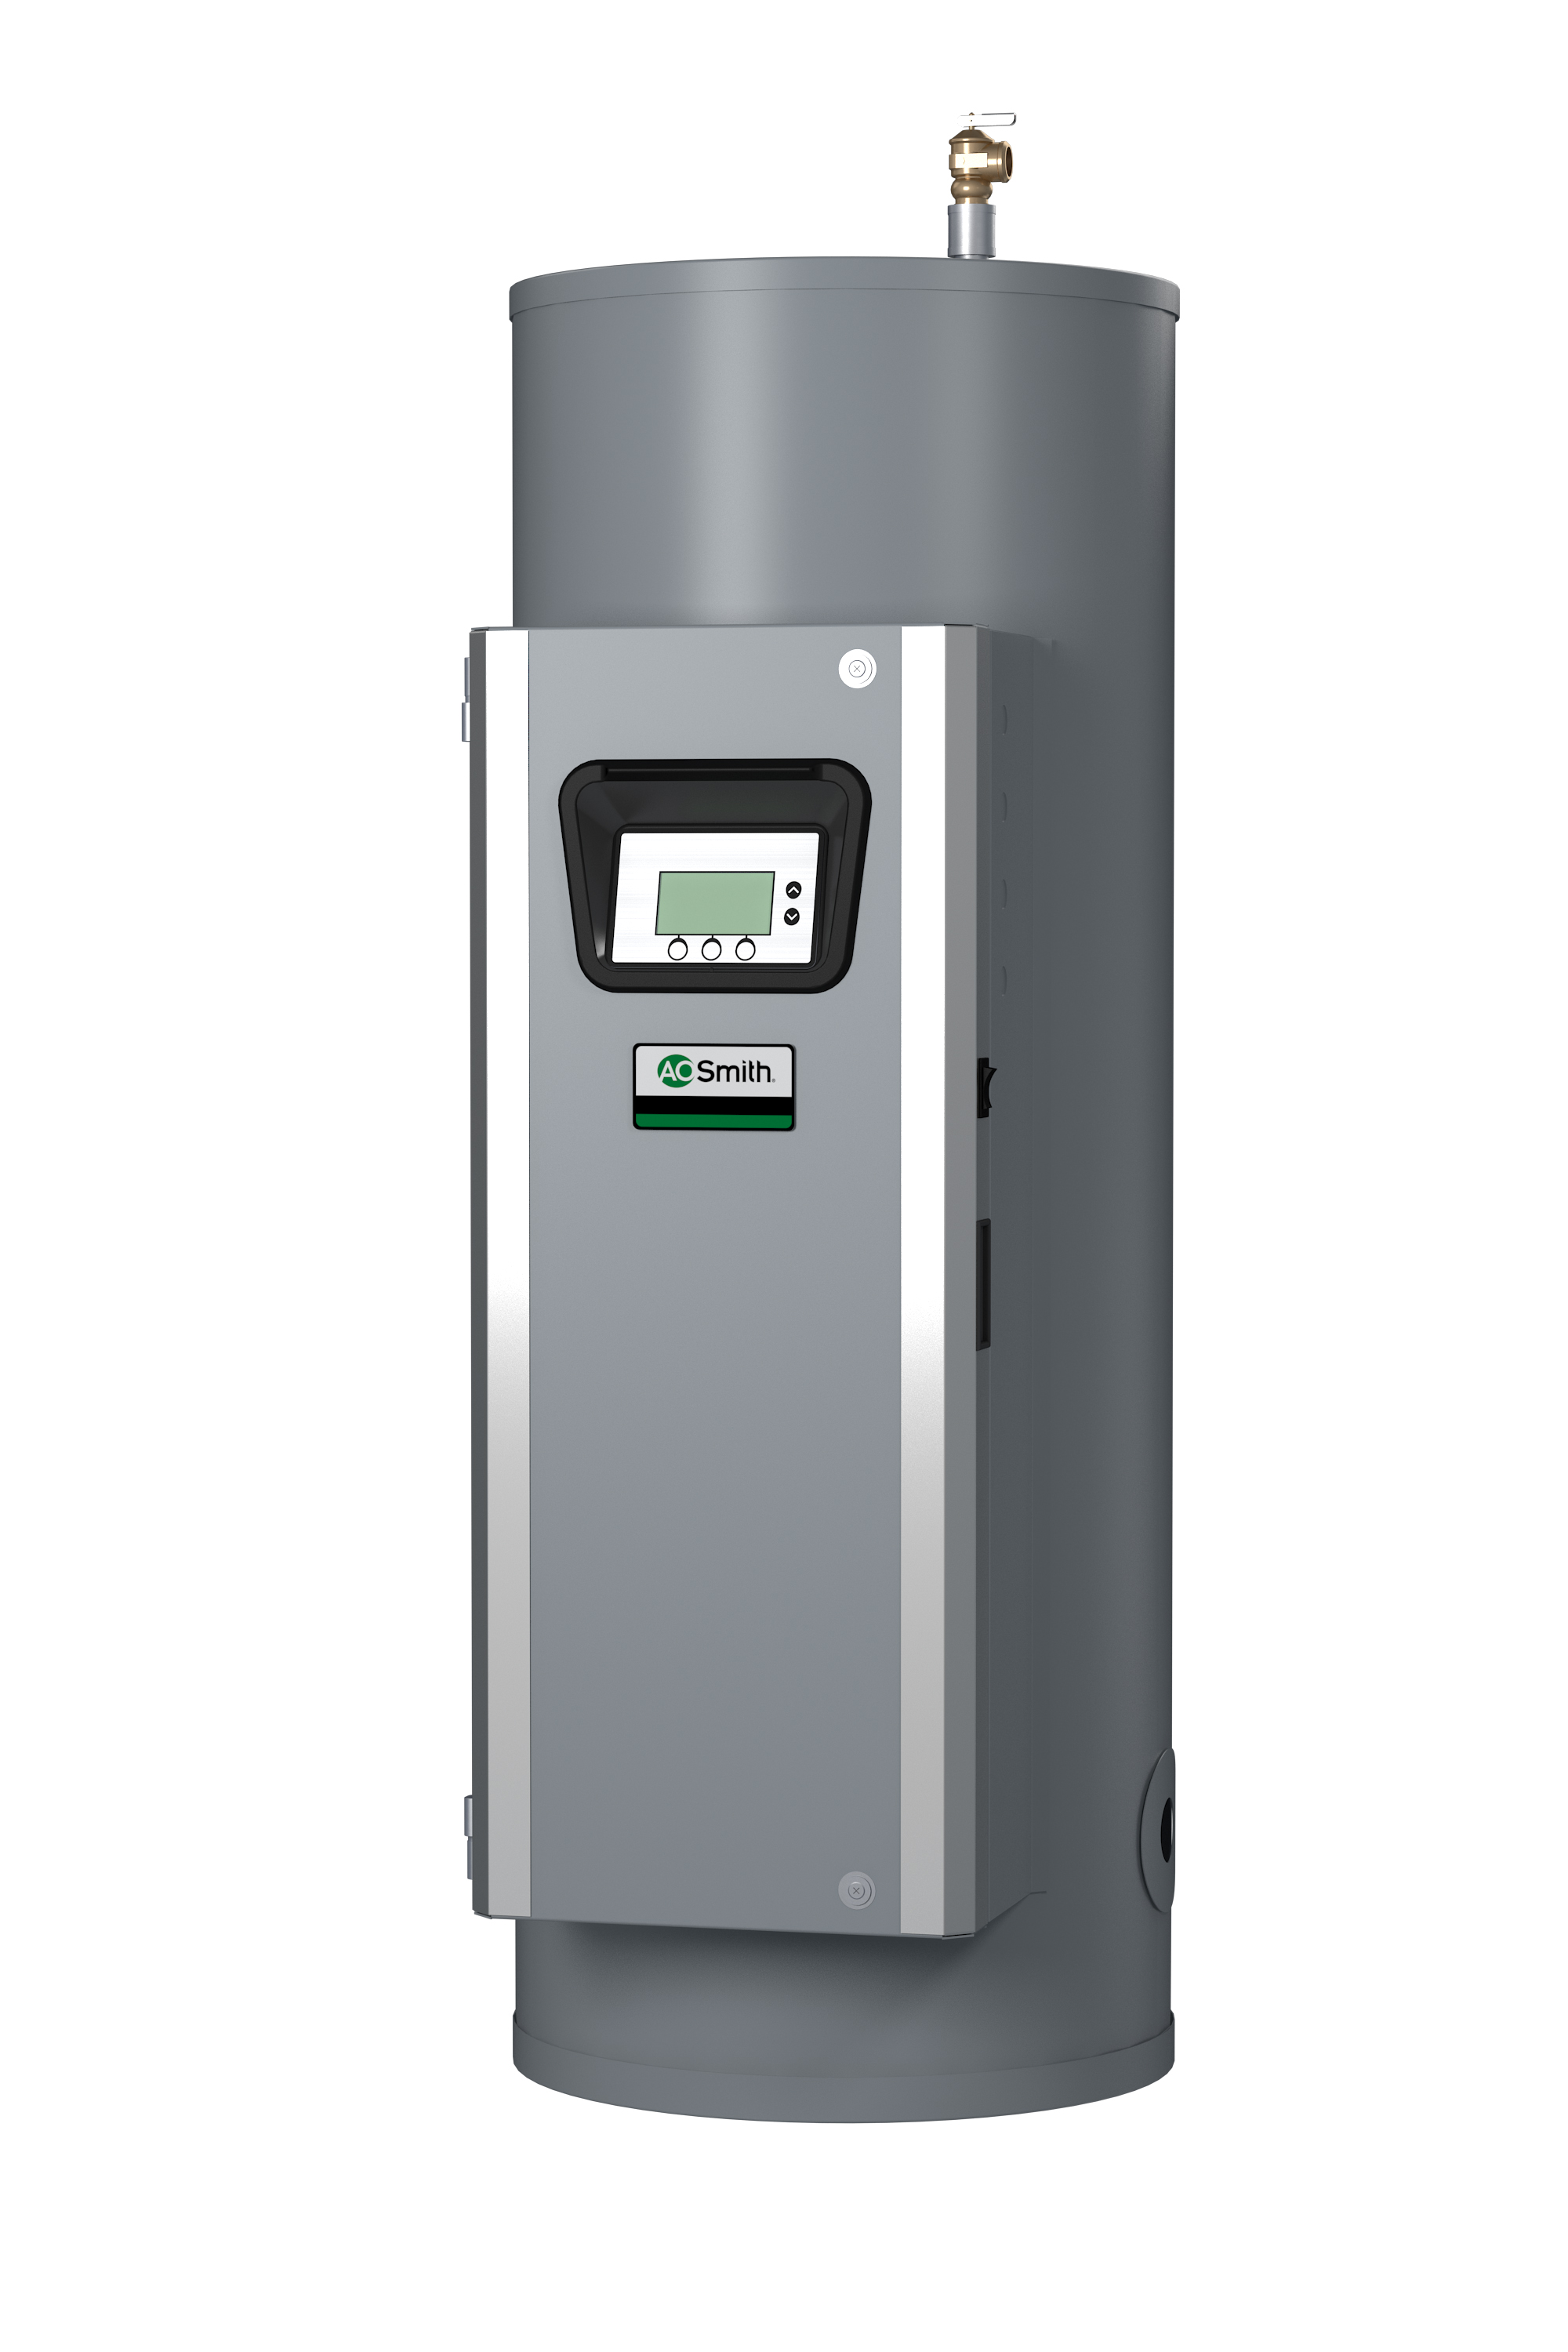 AO SMITH DSE-100A-36: 100 GALLONS, 36KW, 208 VOLT, 173.1 AMPS, 1 PHASE, 2 ELEMENTS, ASME CUSTOM Xi SERIES HEAVY DUTY COMMERCIAL ELECTRIC WATER HEATER